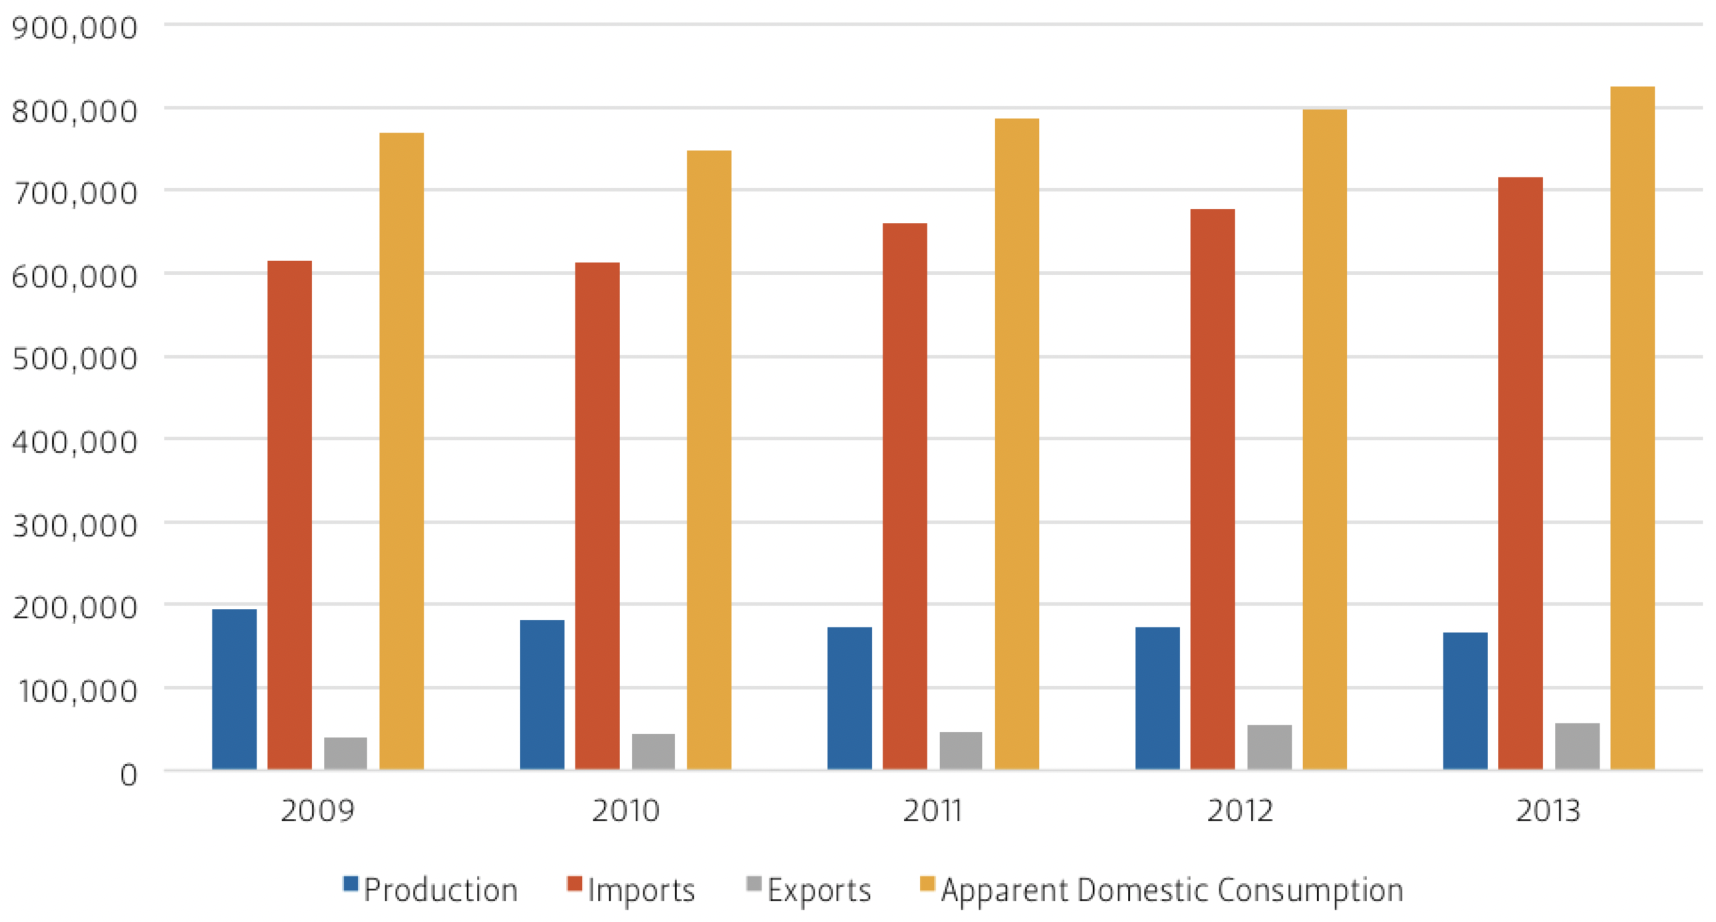 This graph compares Mexico's high-density polyethylene trade, production, and consumption over time.